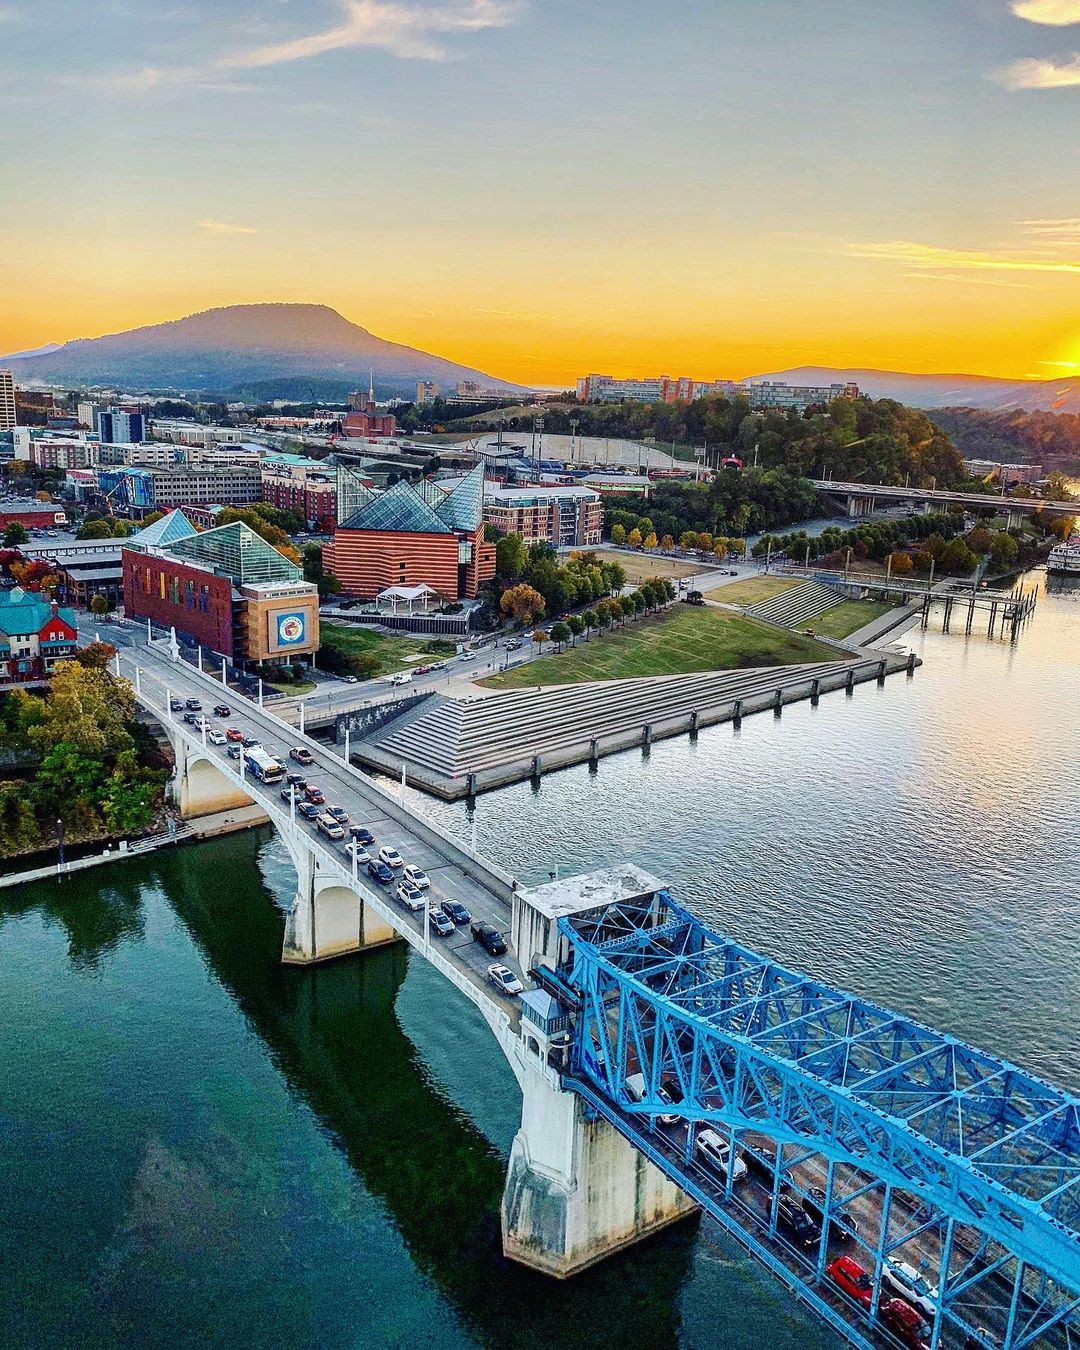 Chief John Ross Bridge Going Across the Tennessee River toward Downtown Chattanooga. Photo by Instagram user @rockcreekaviation